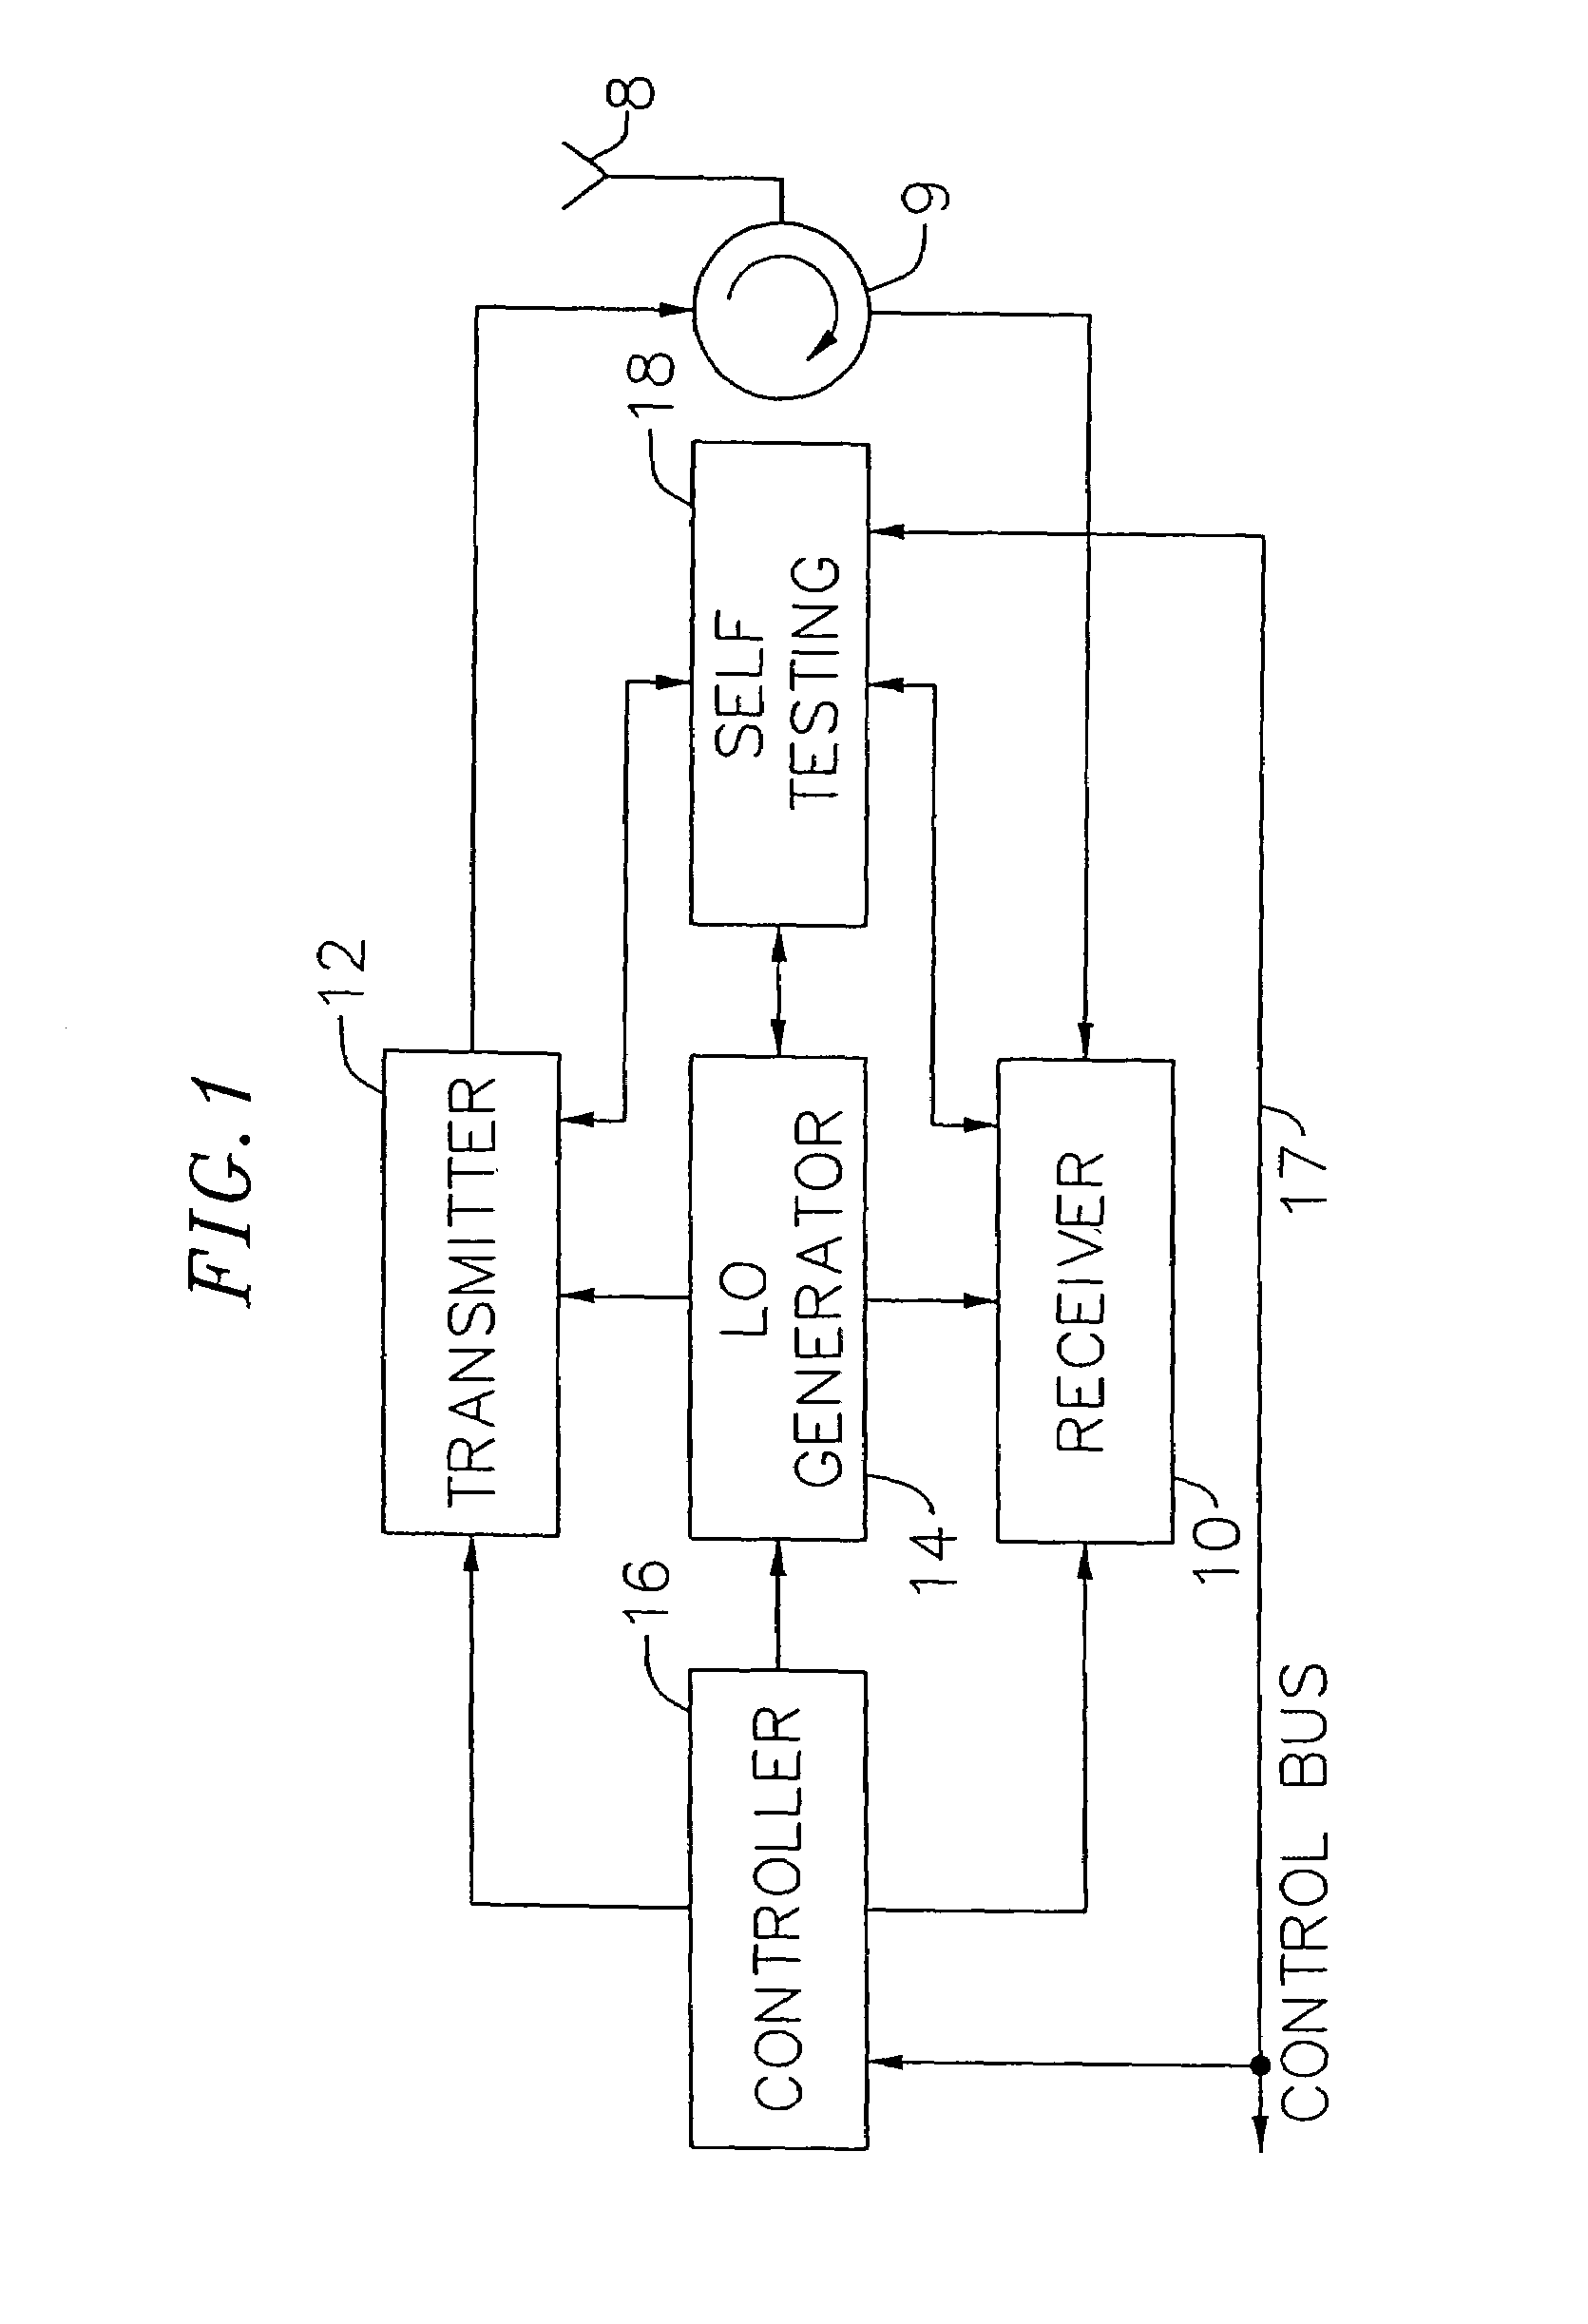 Adaptive radio transceiver with a power amplifier